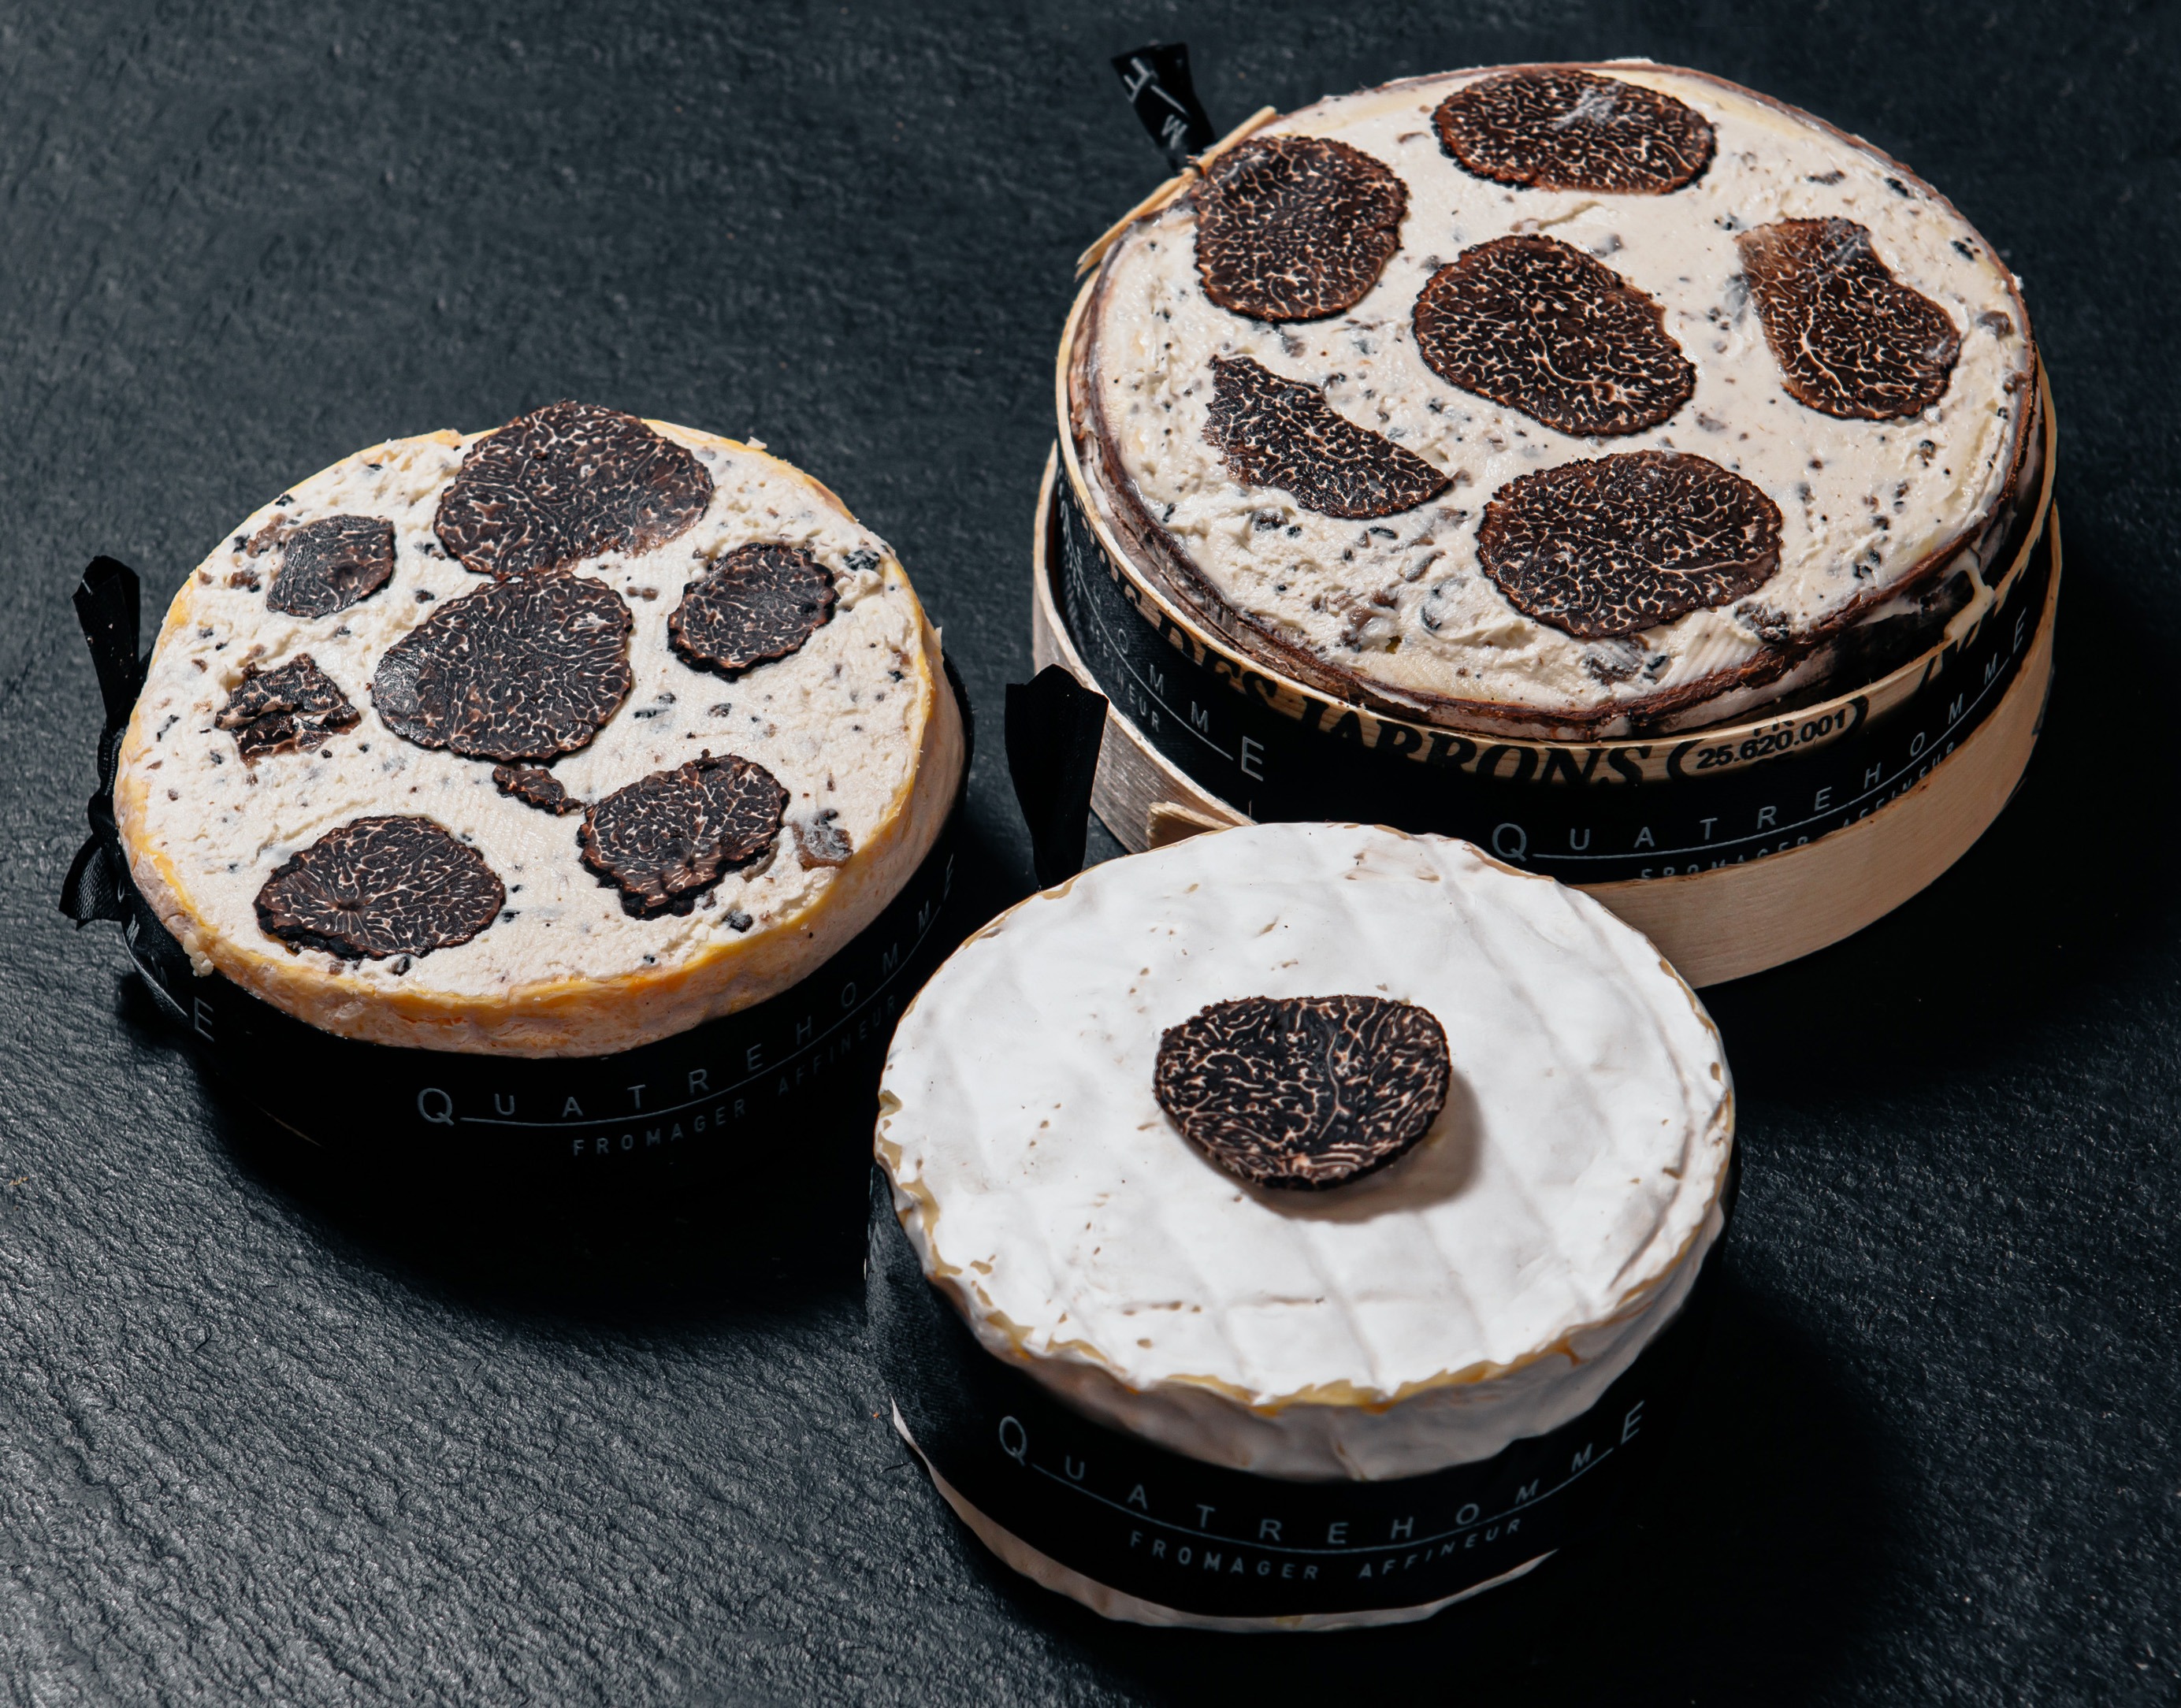 Mont d'Or with truffle